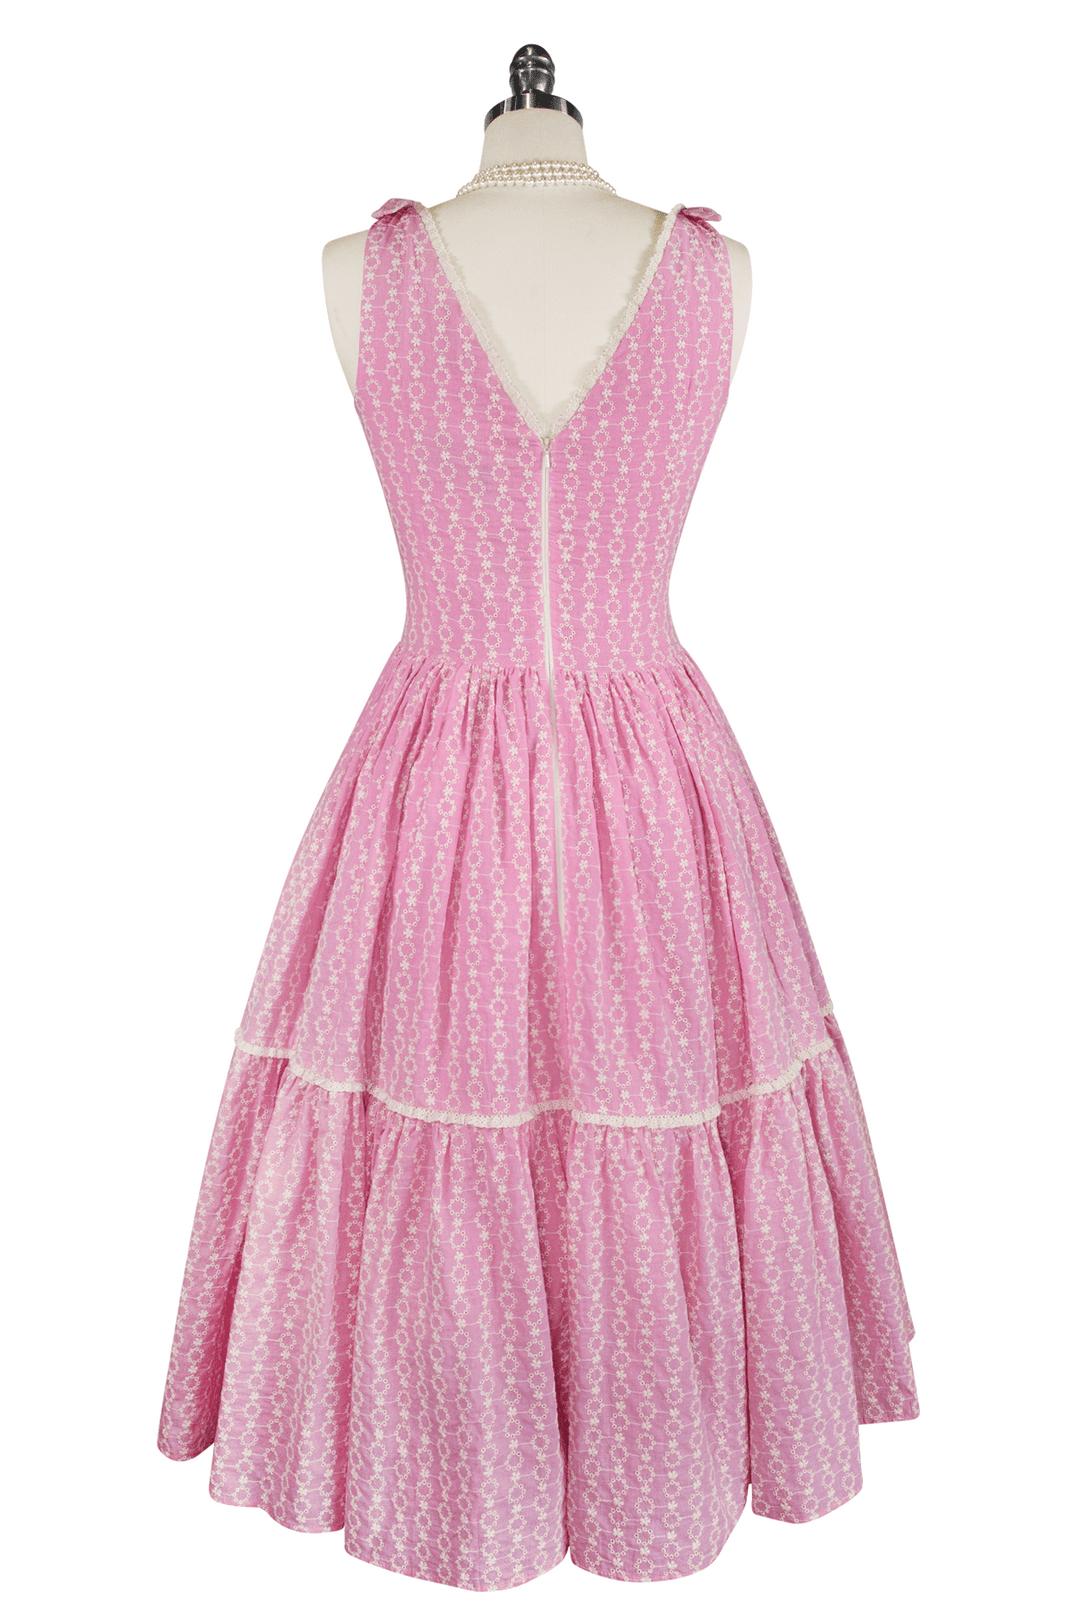 French Vacation Dress - Kitten D'Amour